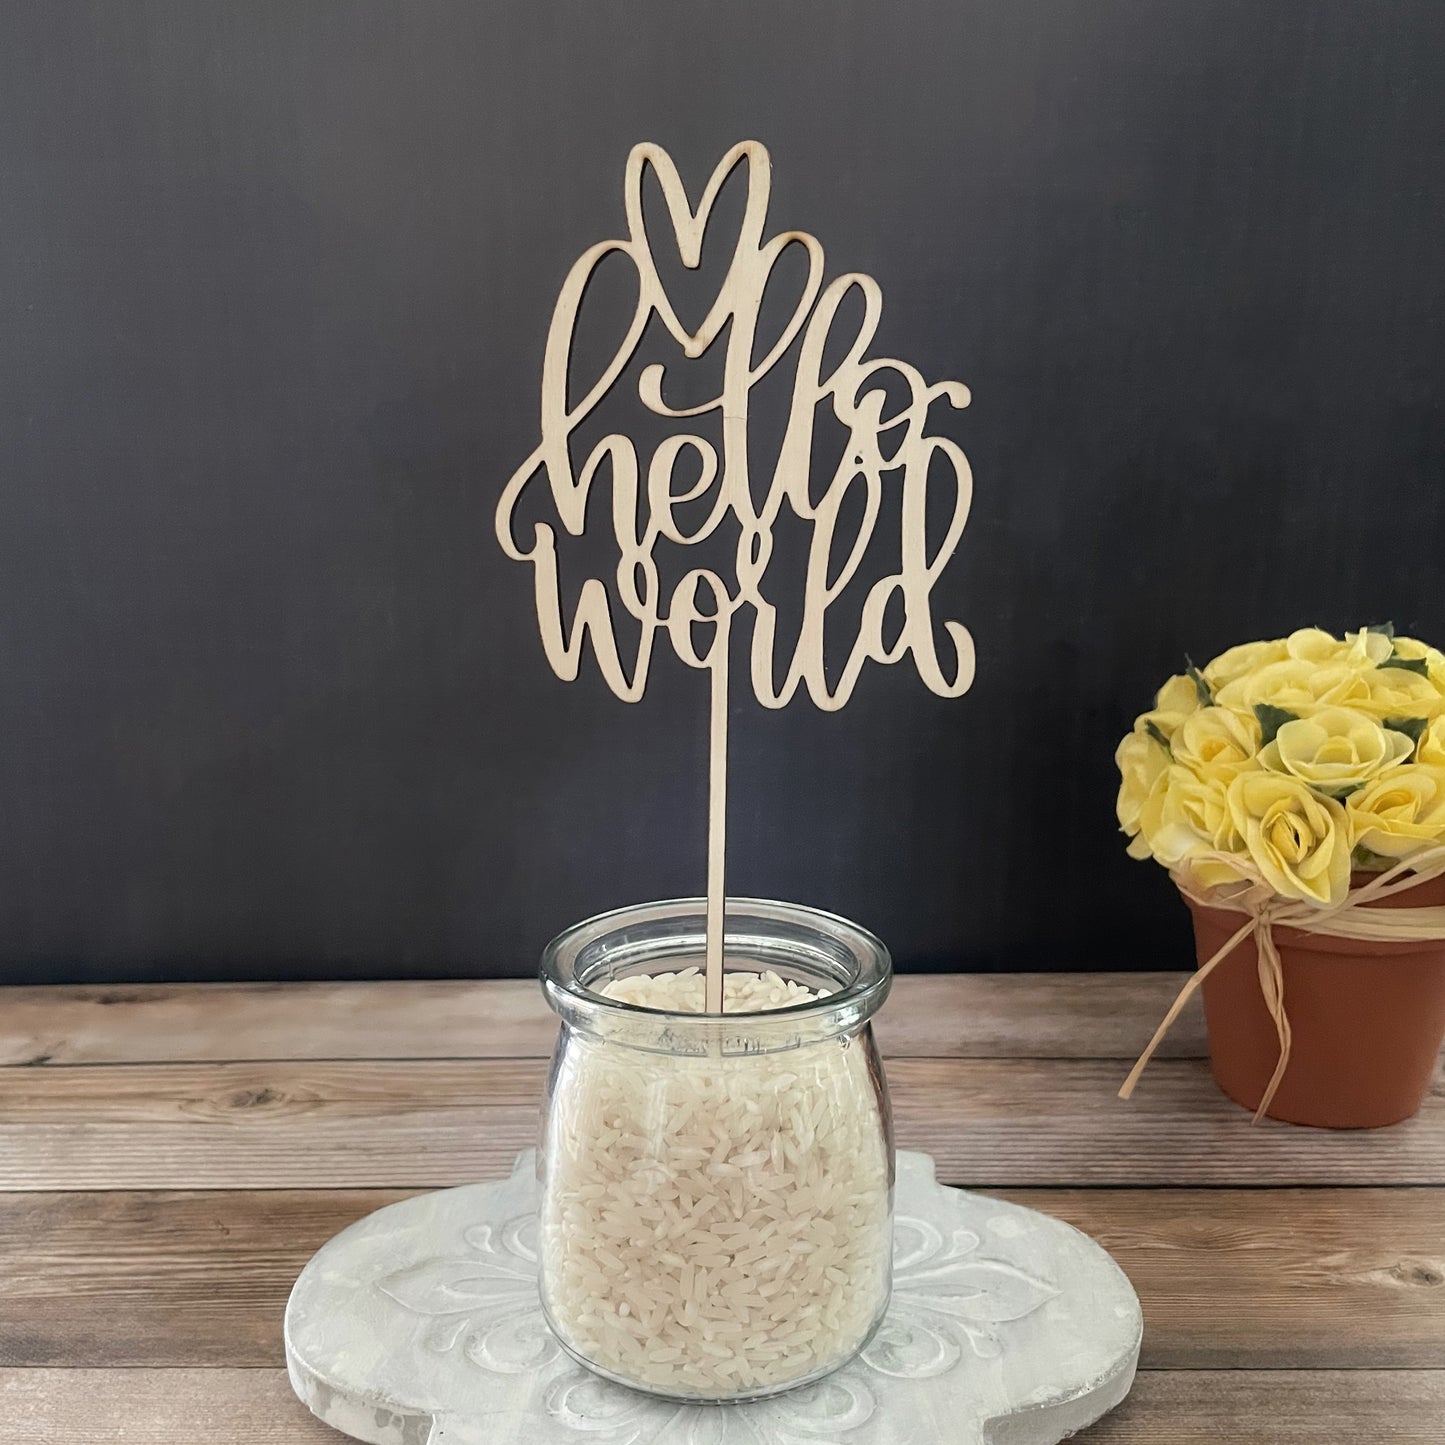 Hello World wood cake topper, welcome baby cake topper